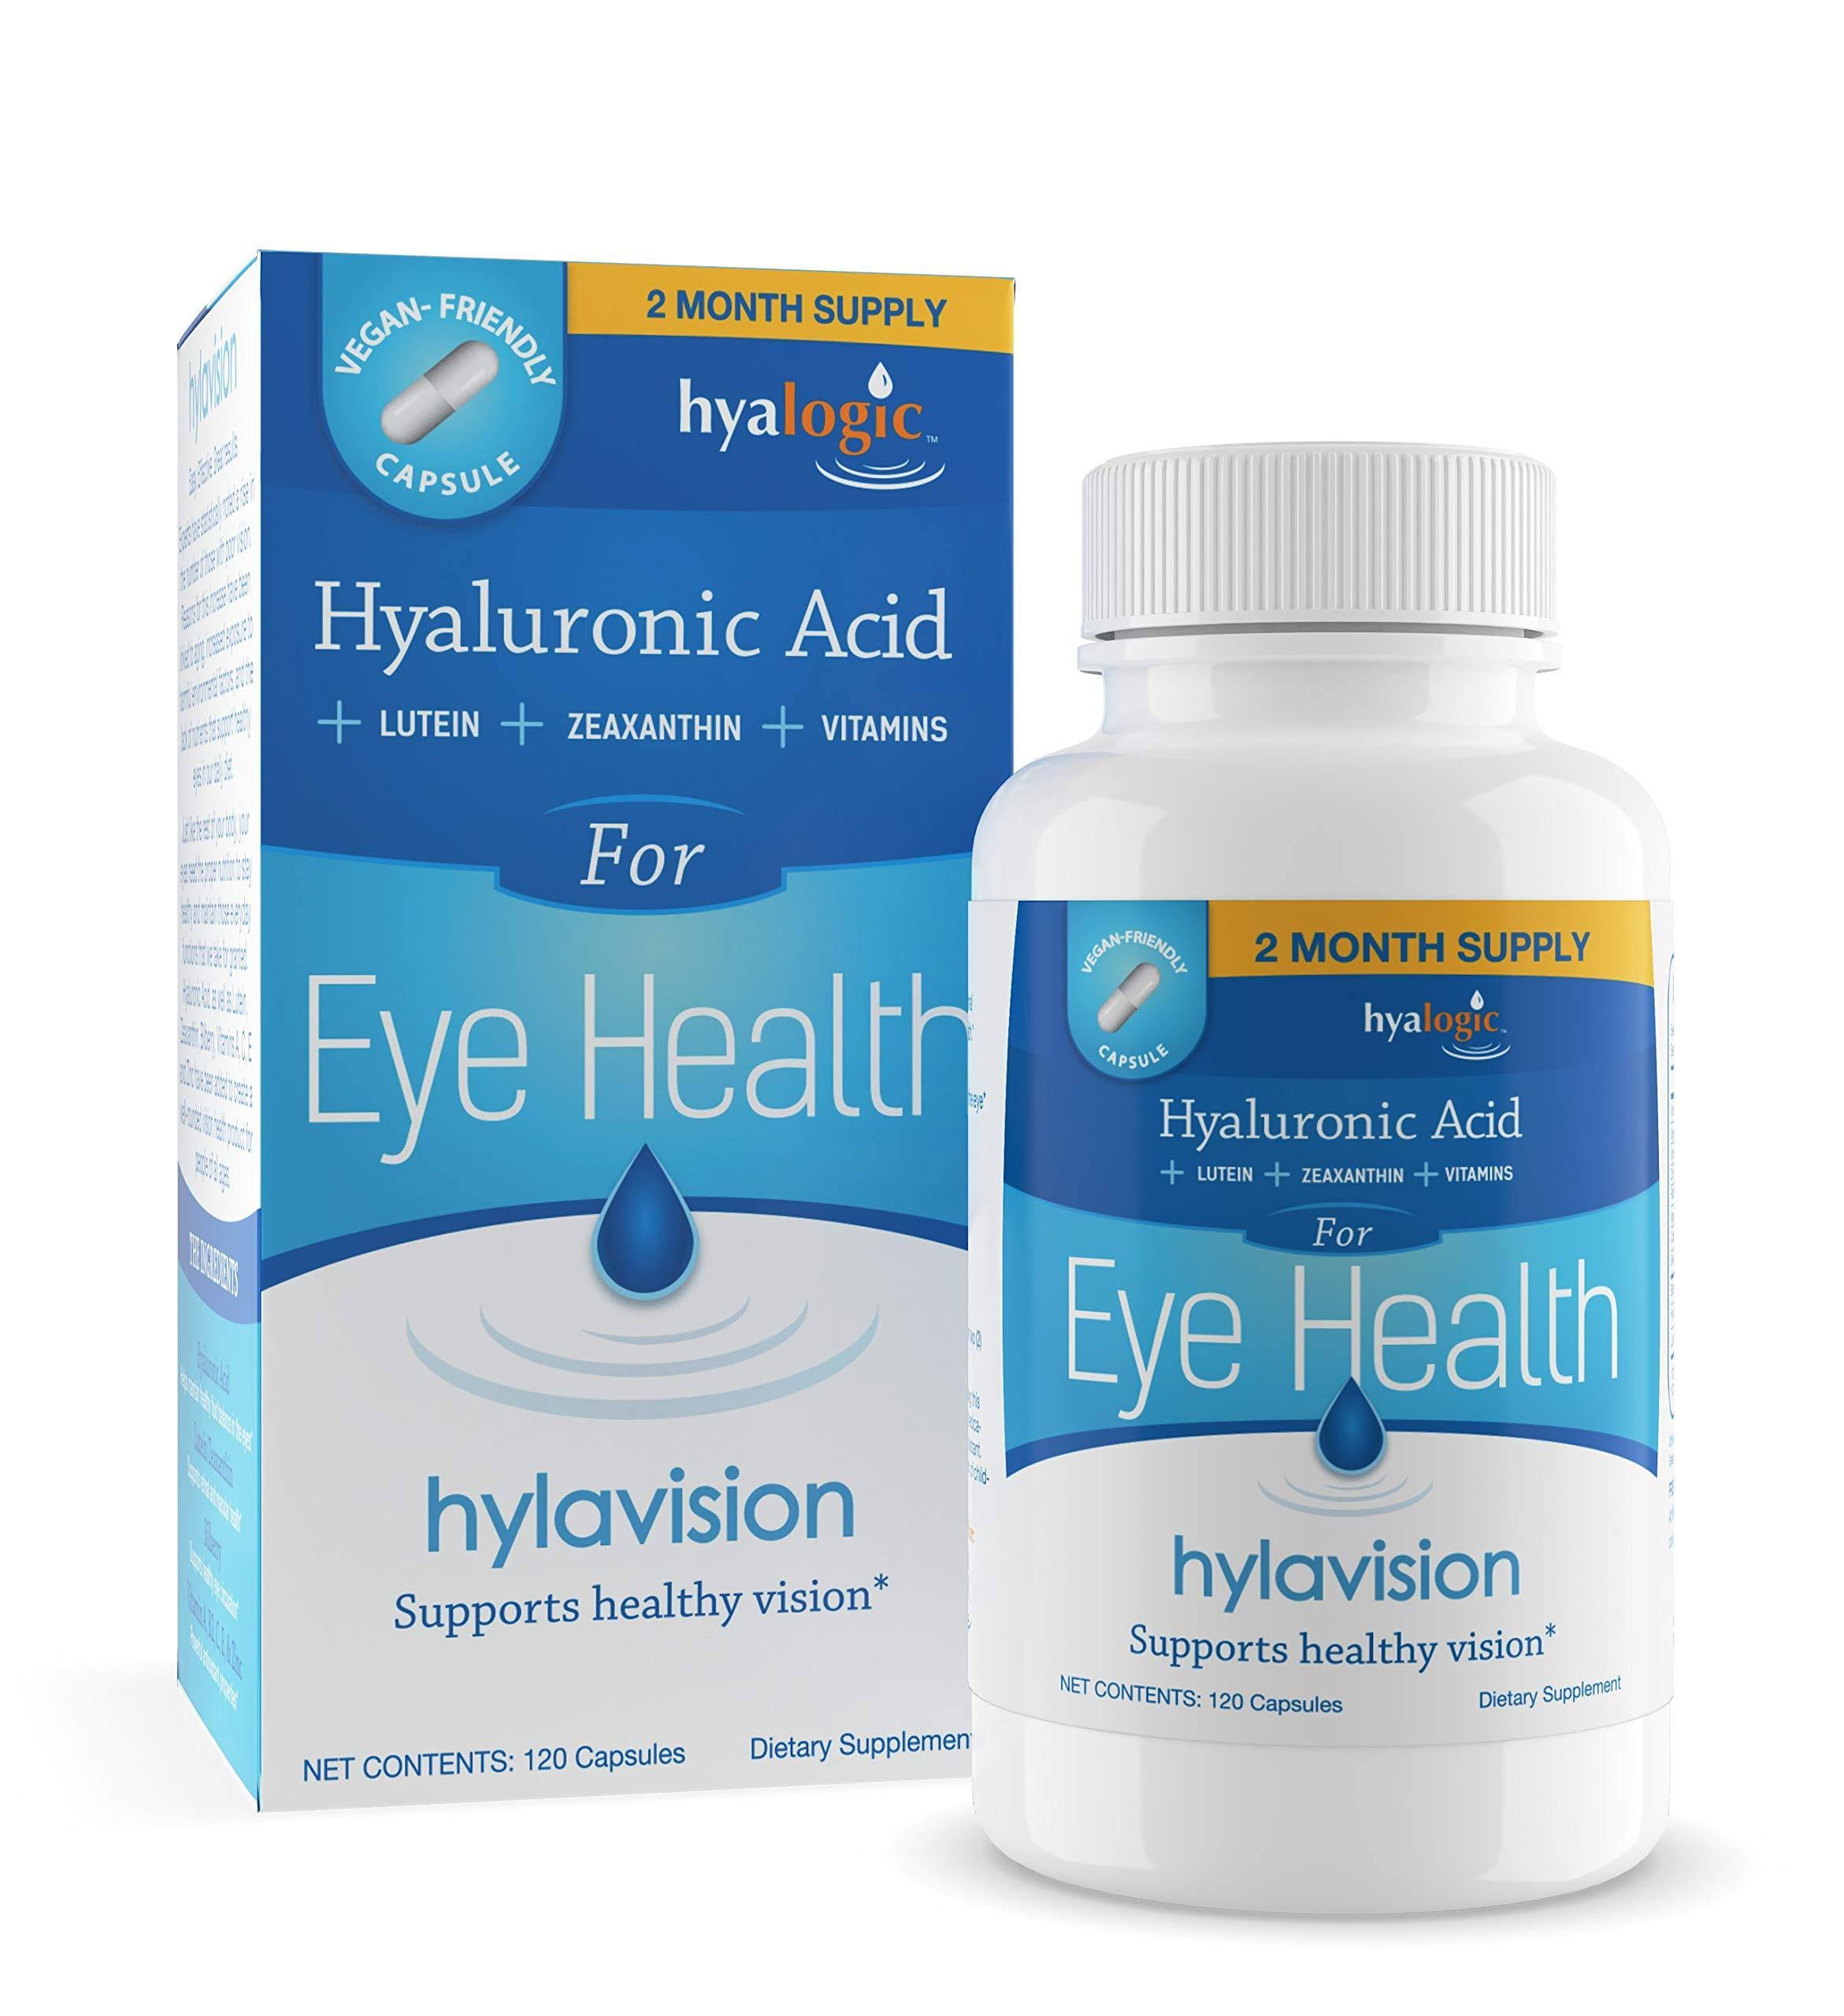 Hyalogic Hylavision Healht Care Supplement - 120ct